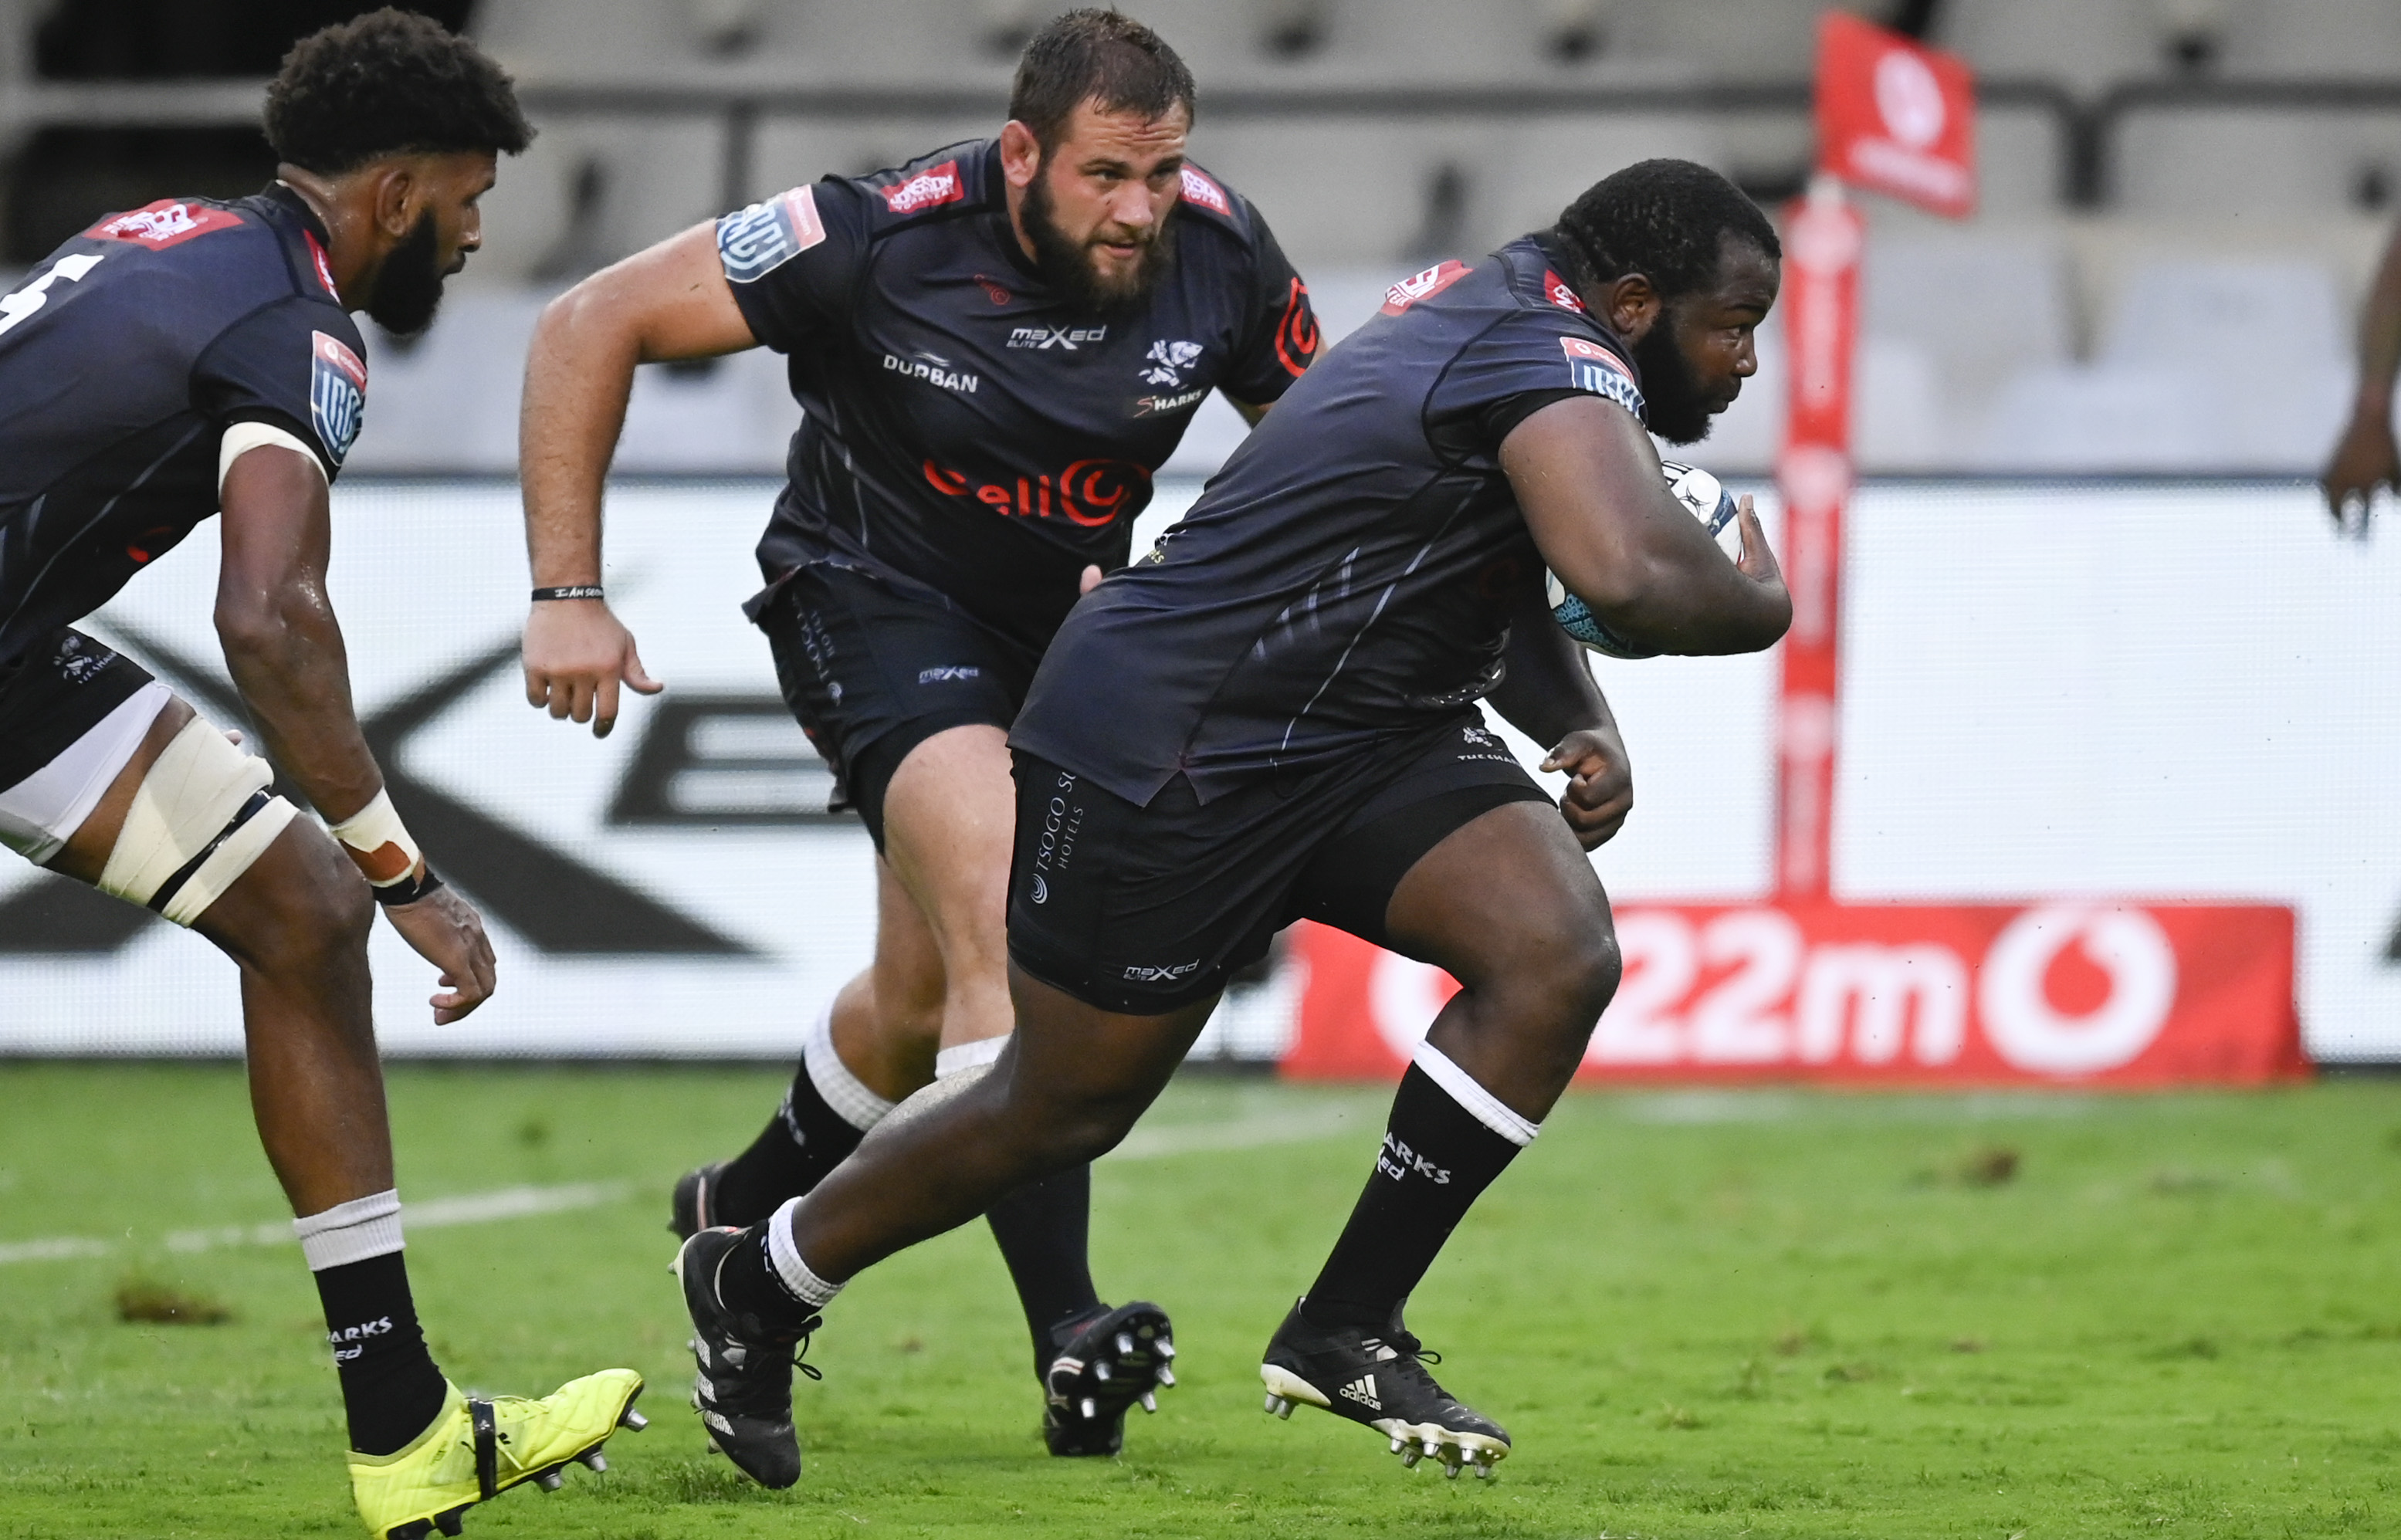 Ox Nche of the Sharks during the United Rugby Championship 2021/22 match between the Sharks and Stormers held at Kings Park in Durban on 29 January 2021 ©Gerhard Duraan/BackpagePix